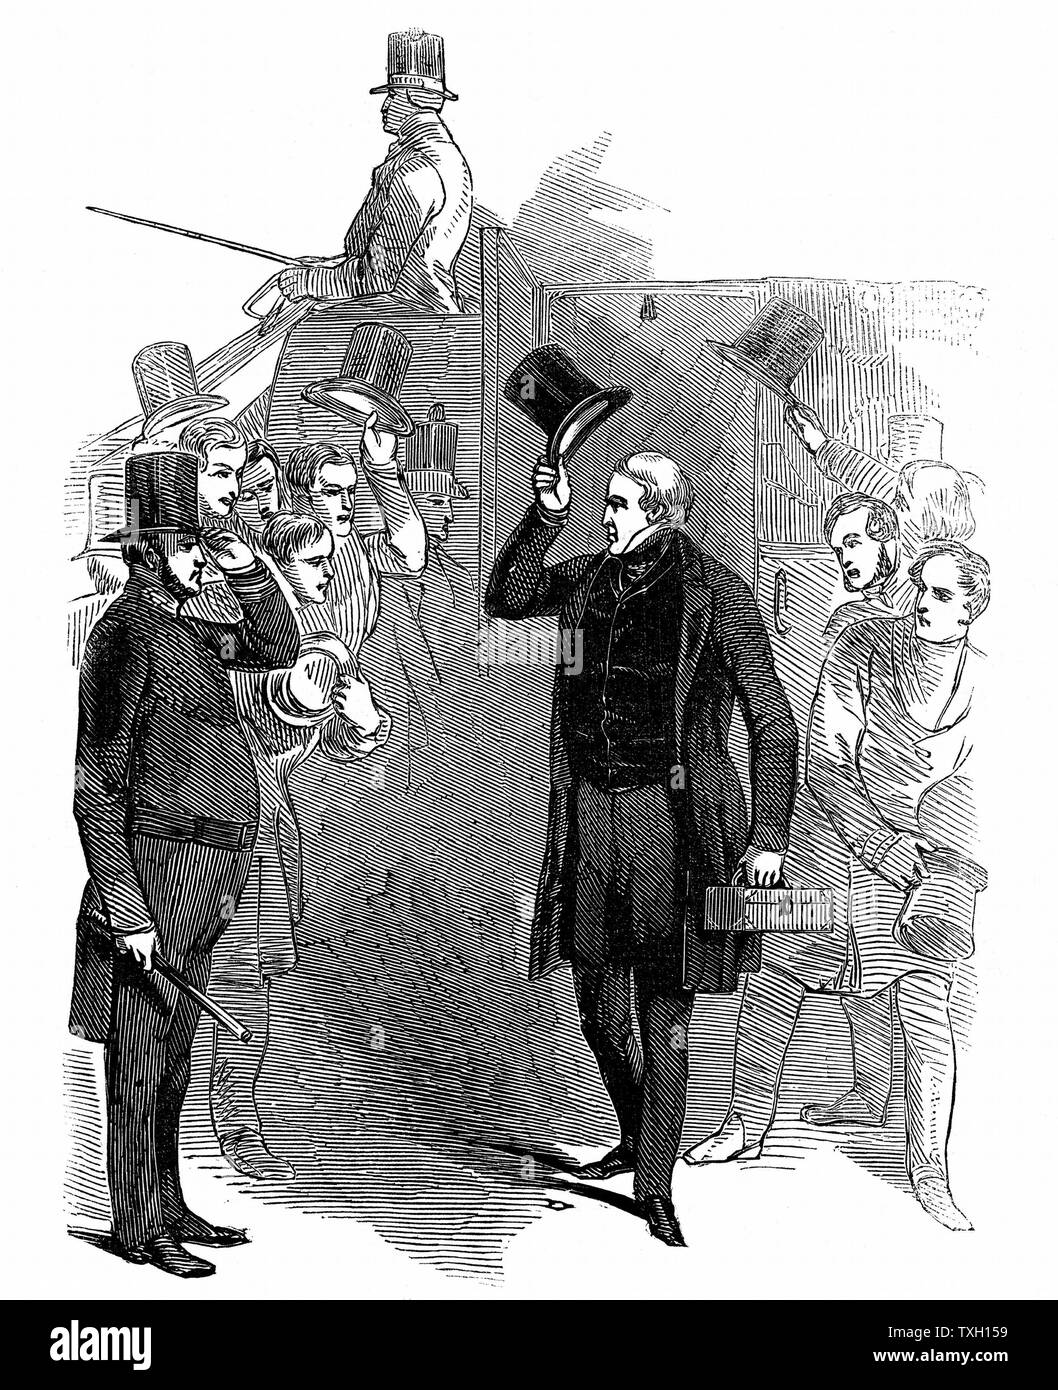 Robert Peel (1788-1850) British statesman, arriving at House of Commons, January, 1846, being saluted by a member of the London police force which he reformed, and which became known as 'Peelers' or 'Bobbies. Woodcut, 1846 Stock Photo